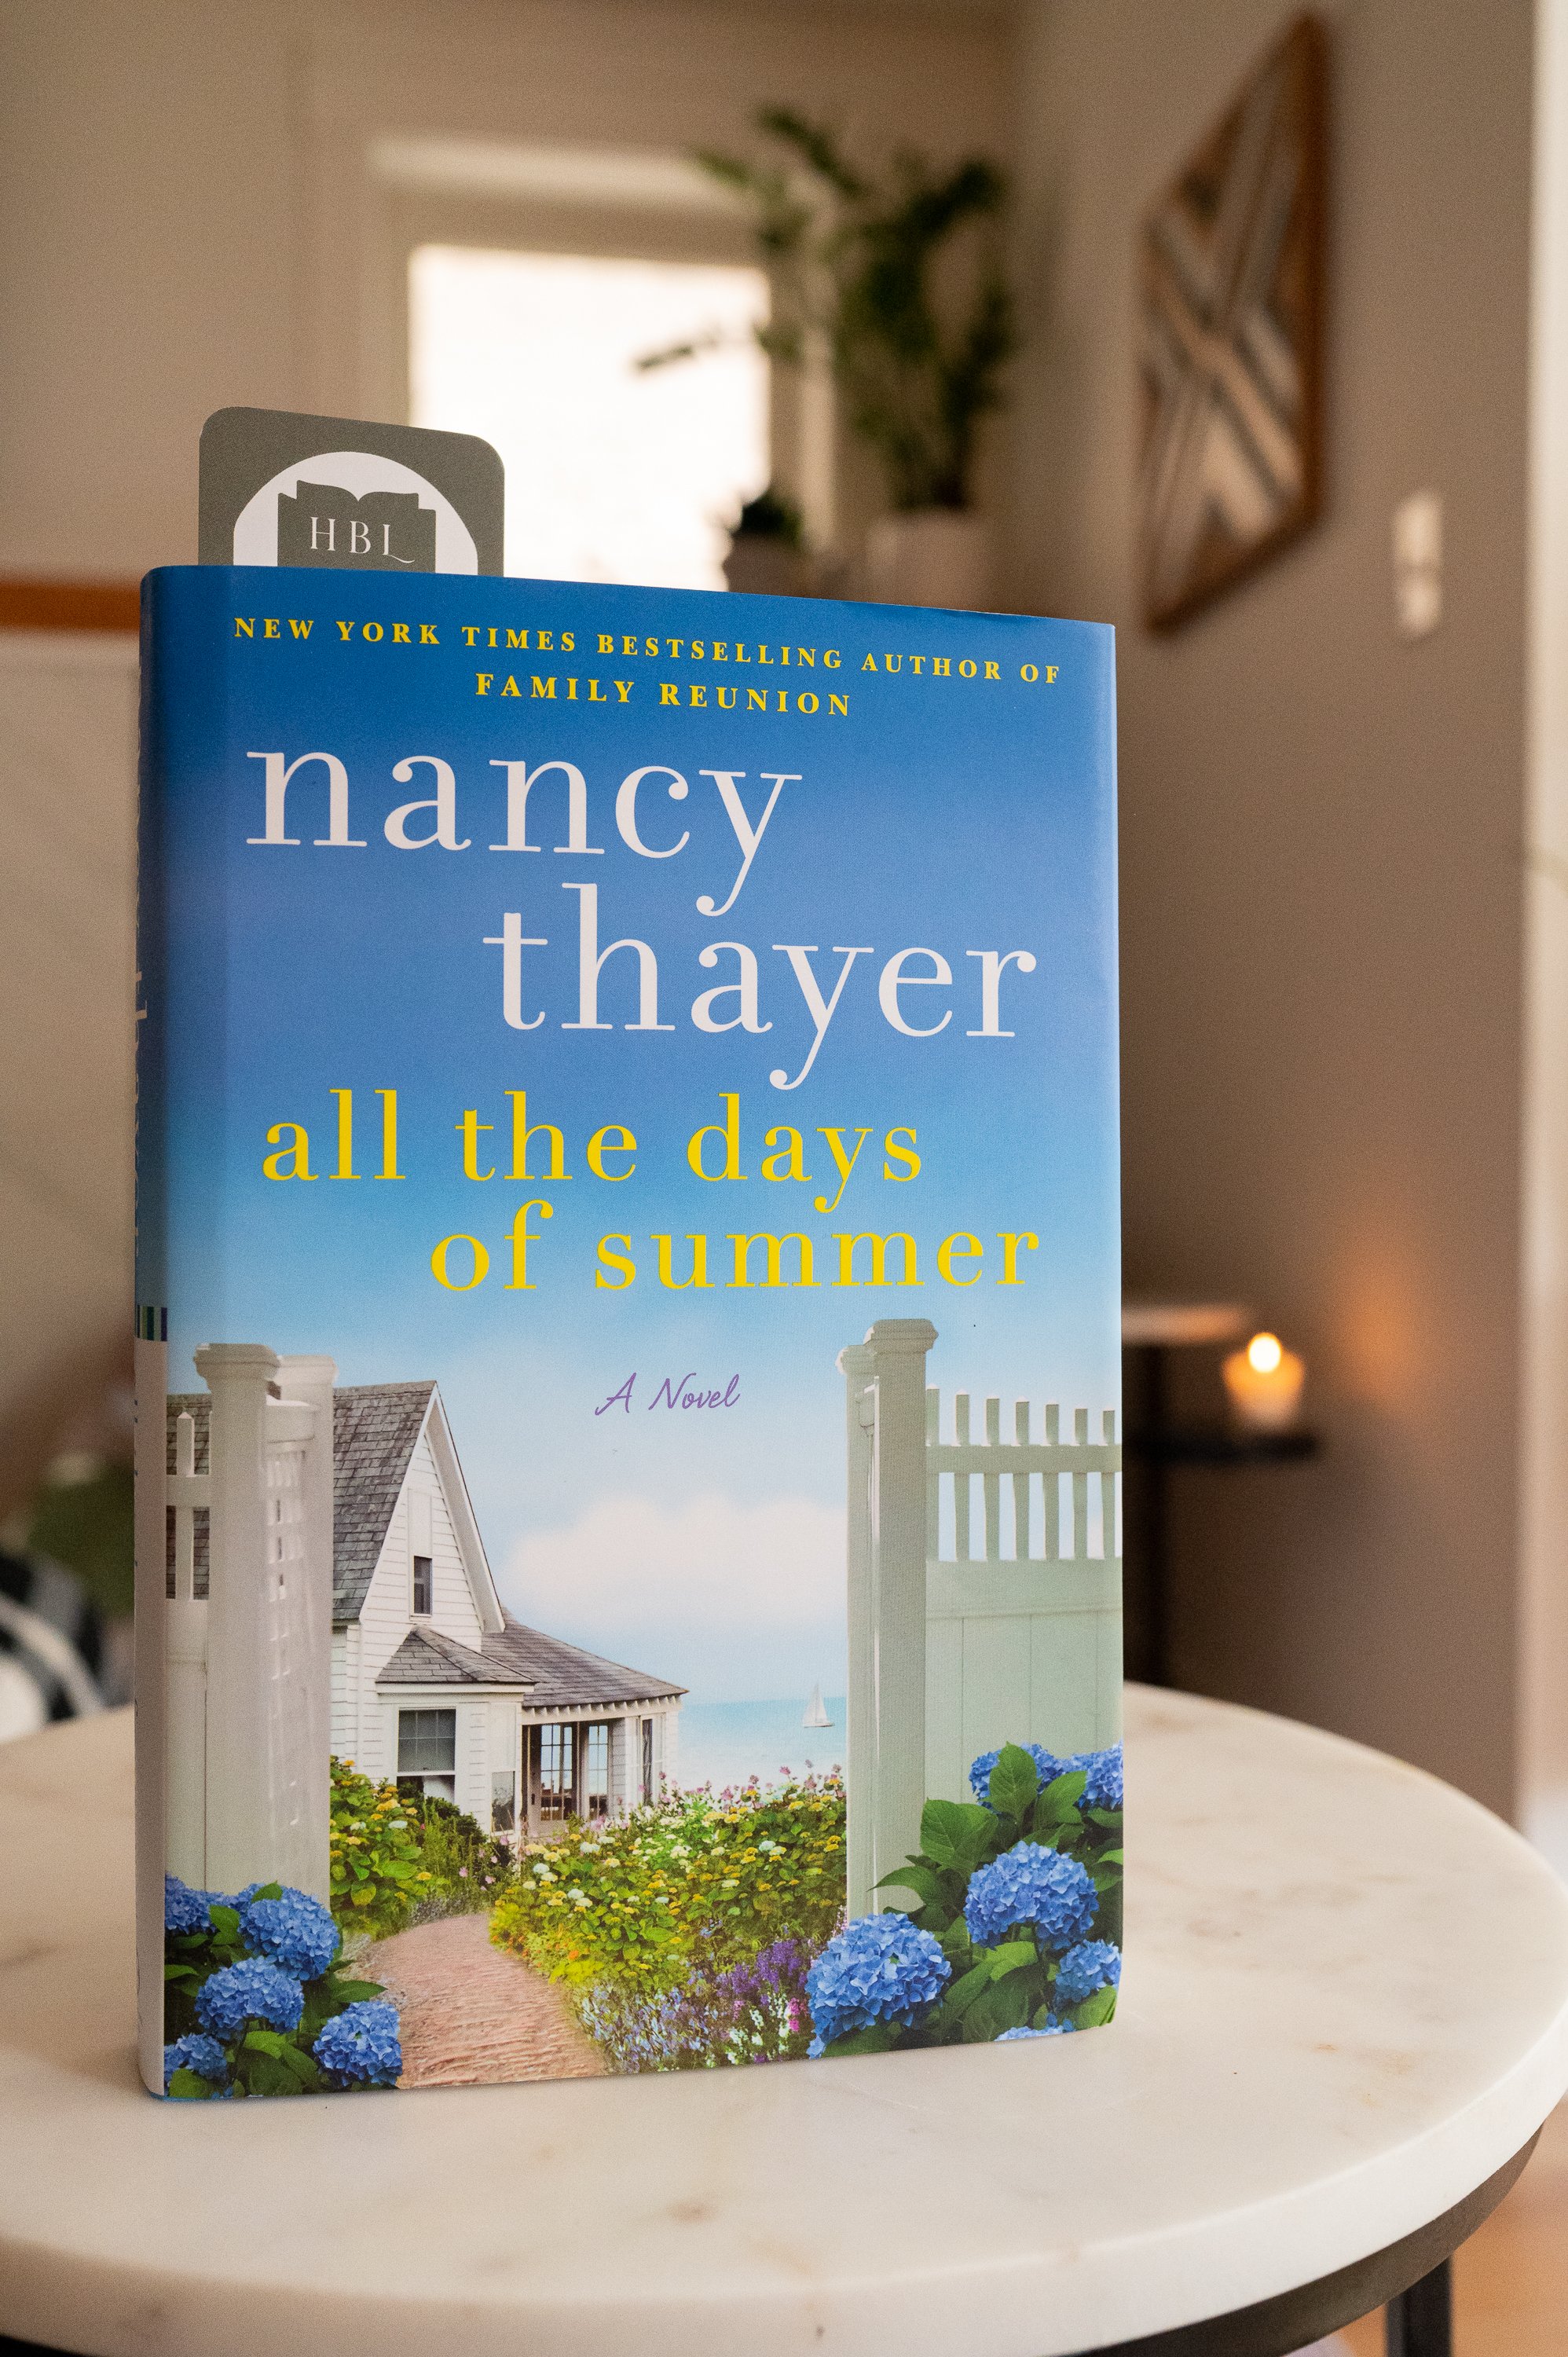 All the Days of Summer by Nancy Thayer.jpg